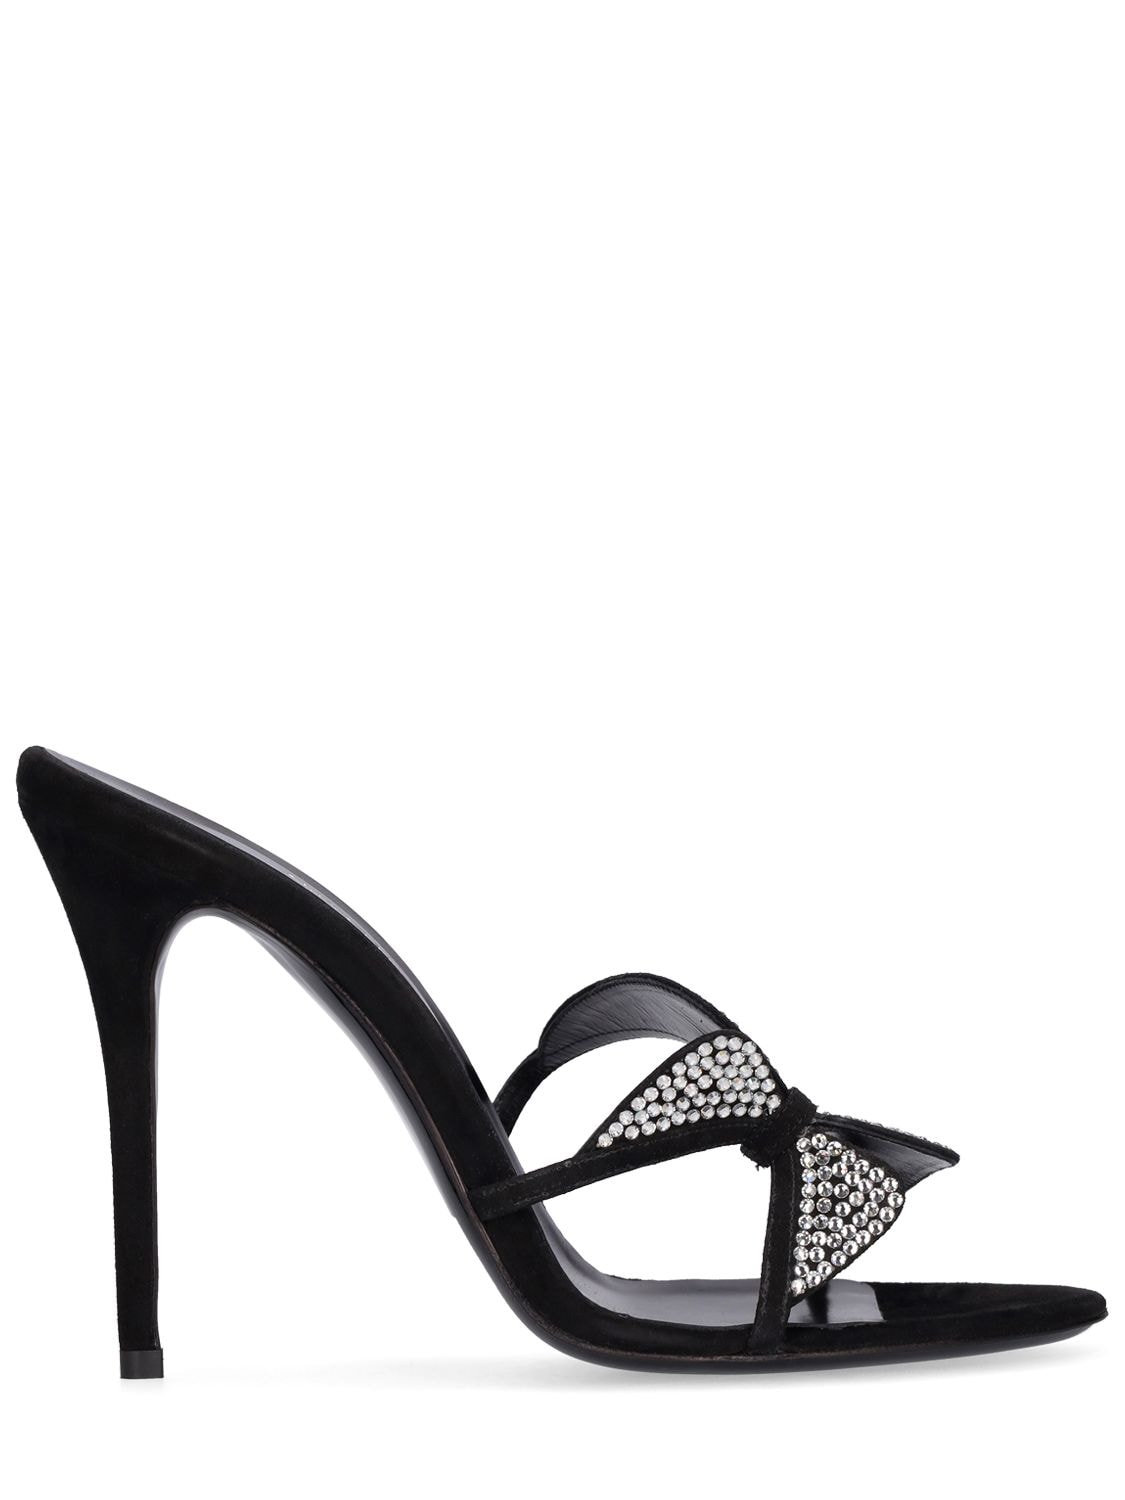 ALESSANDRA RICH 100MM SUEDE & CRYSTAL SANDALS